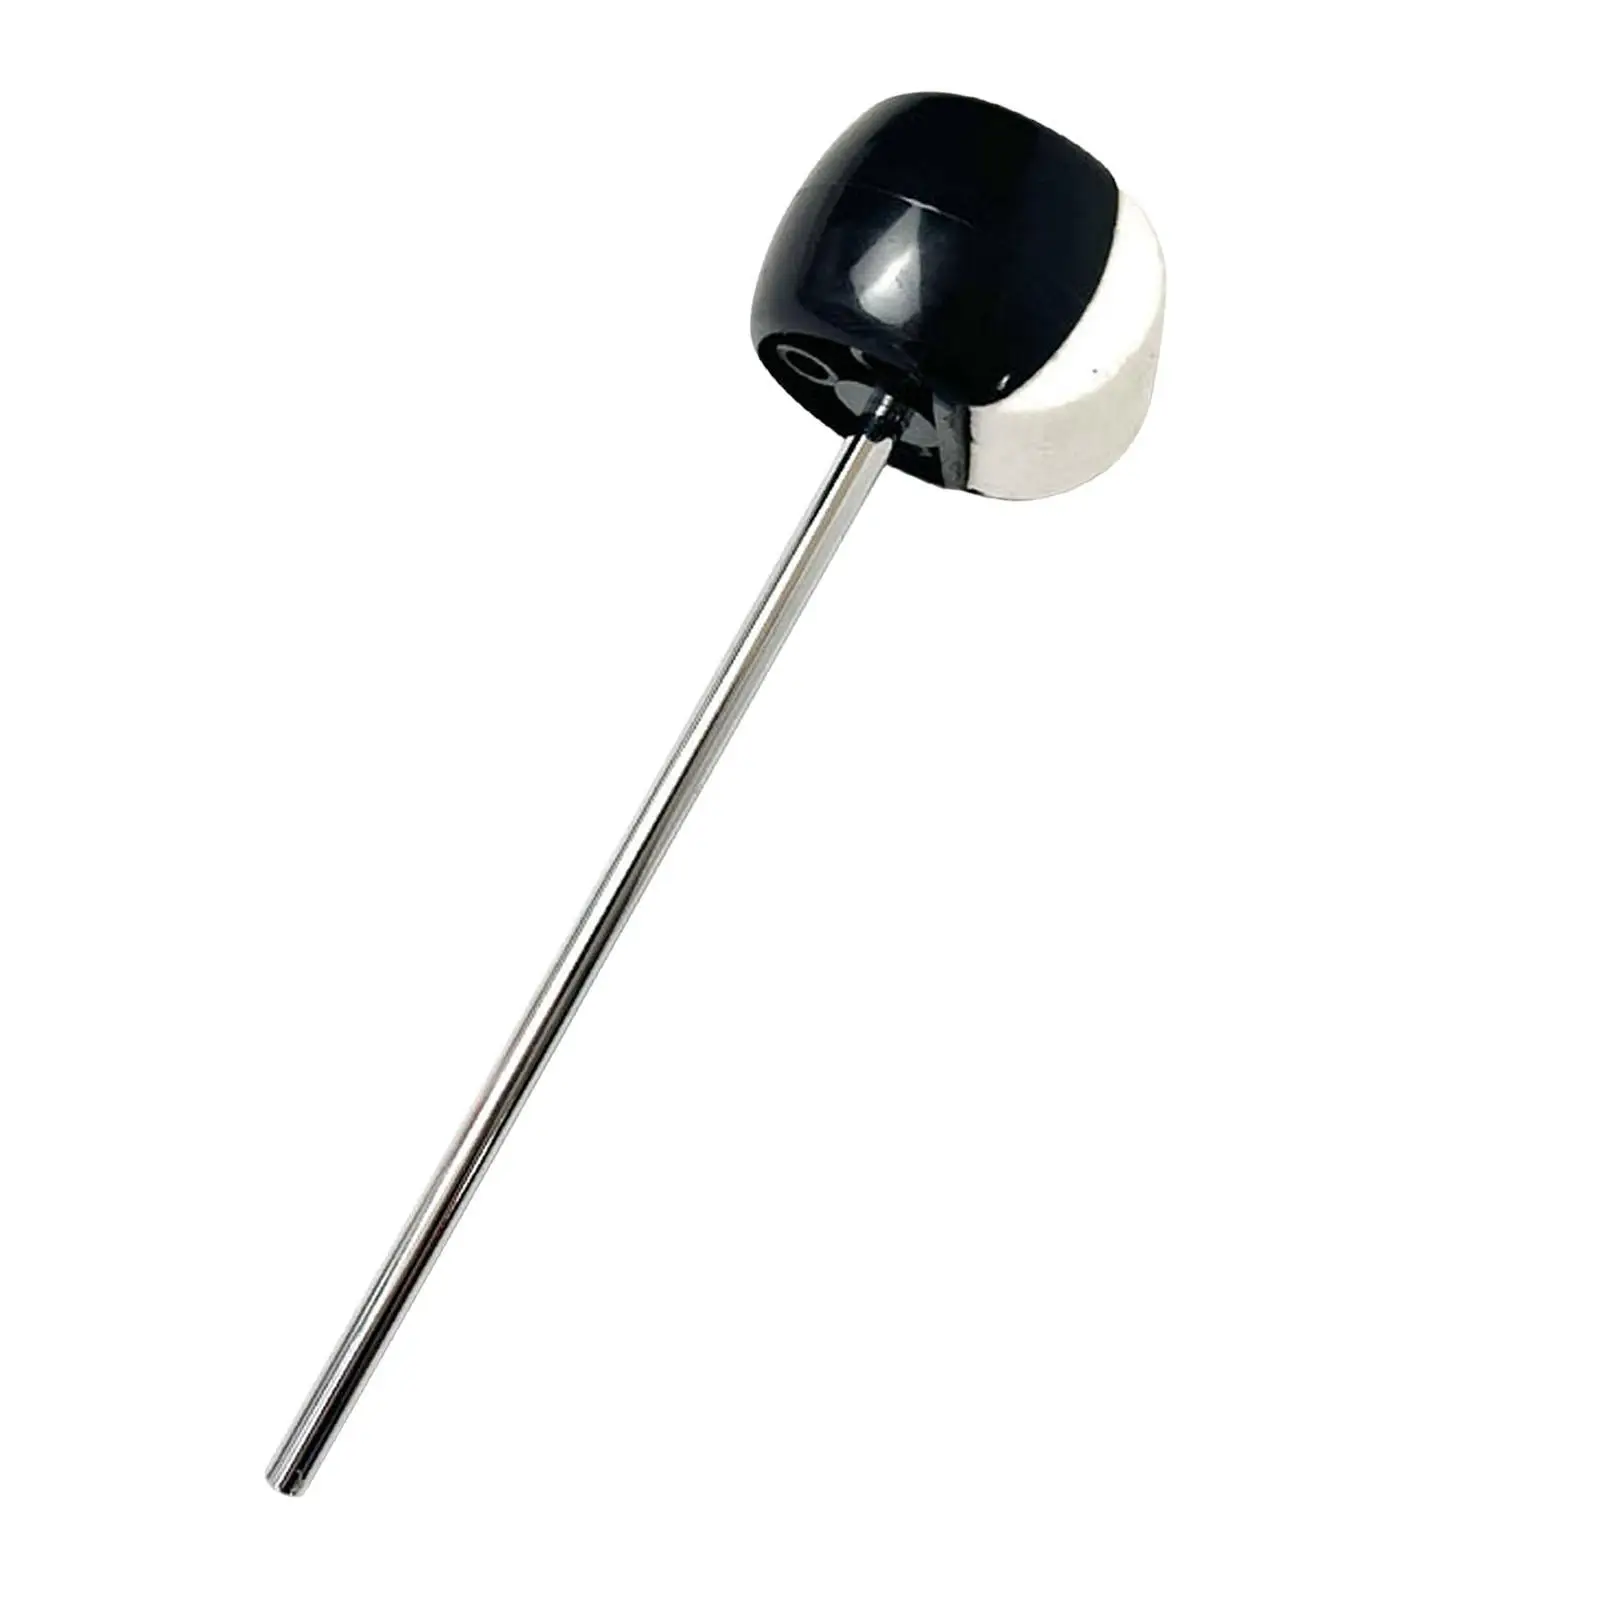 Percussion Instrument Accessory, Bass Drum Mallet Head, Portable Universal Drum Pedal Beater for Electronic Drums